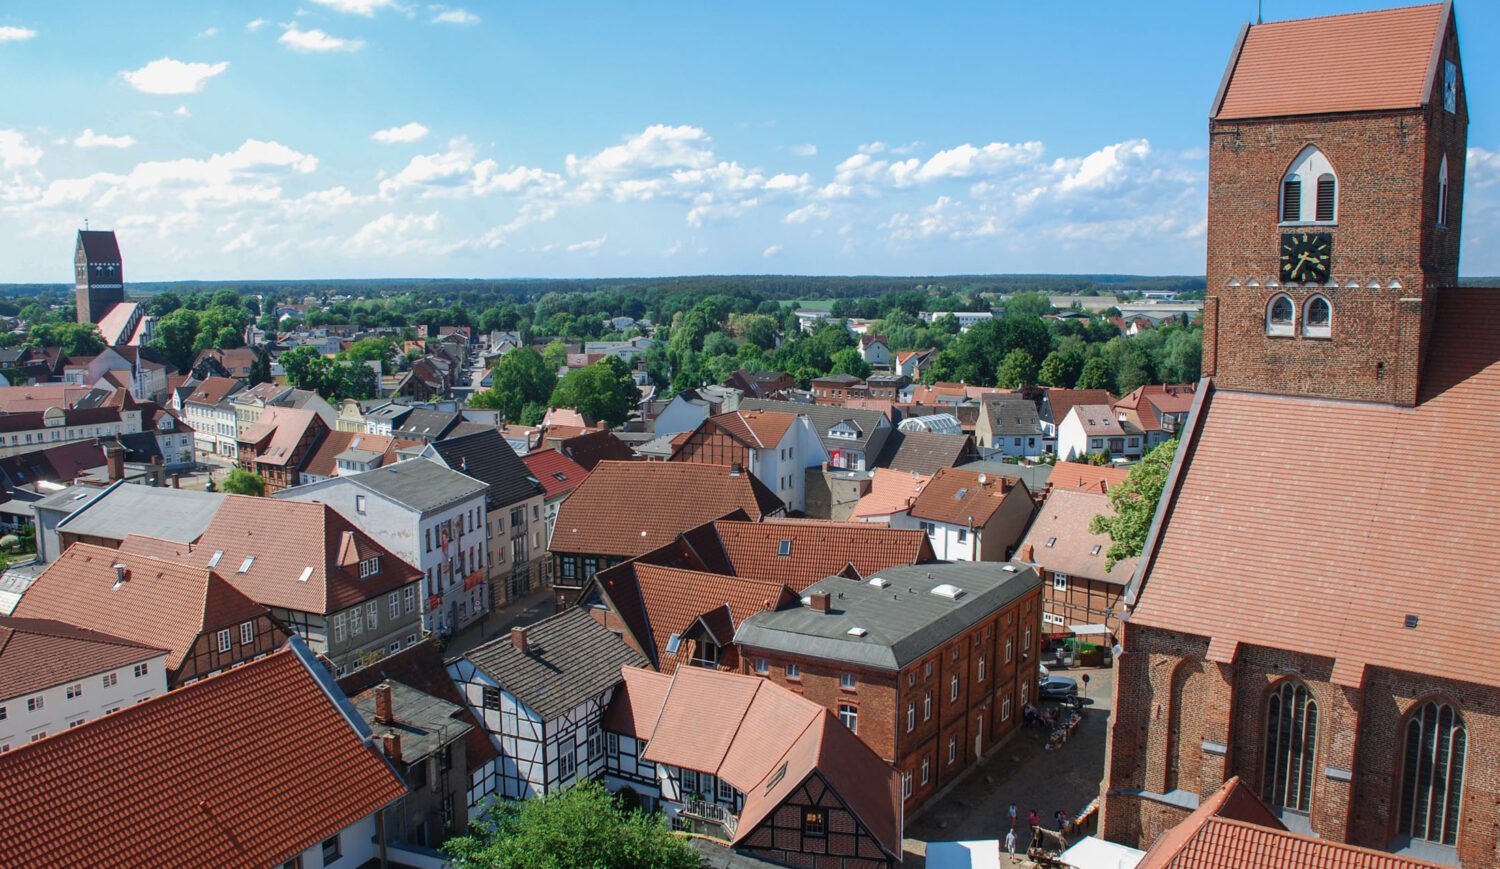 Parchim is one of the oldest cities in Mecklenburg © City of Parchim